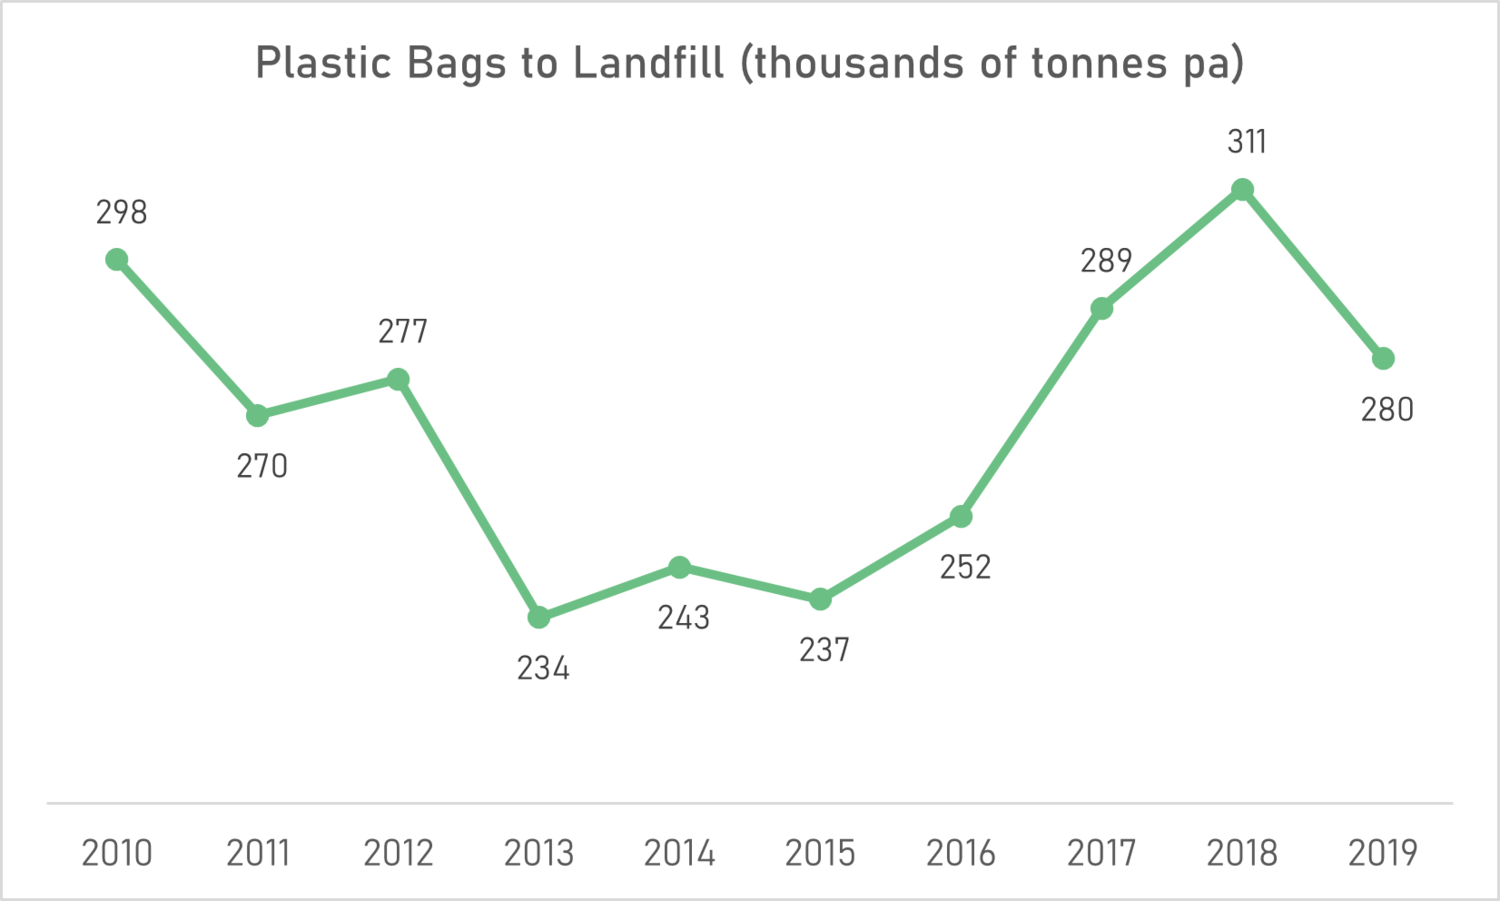 After initial success following implementation in 2009, plastic bag waste has steadily crept up to prior levels.